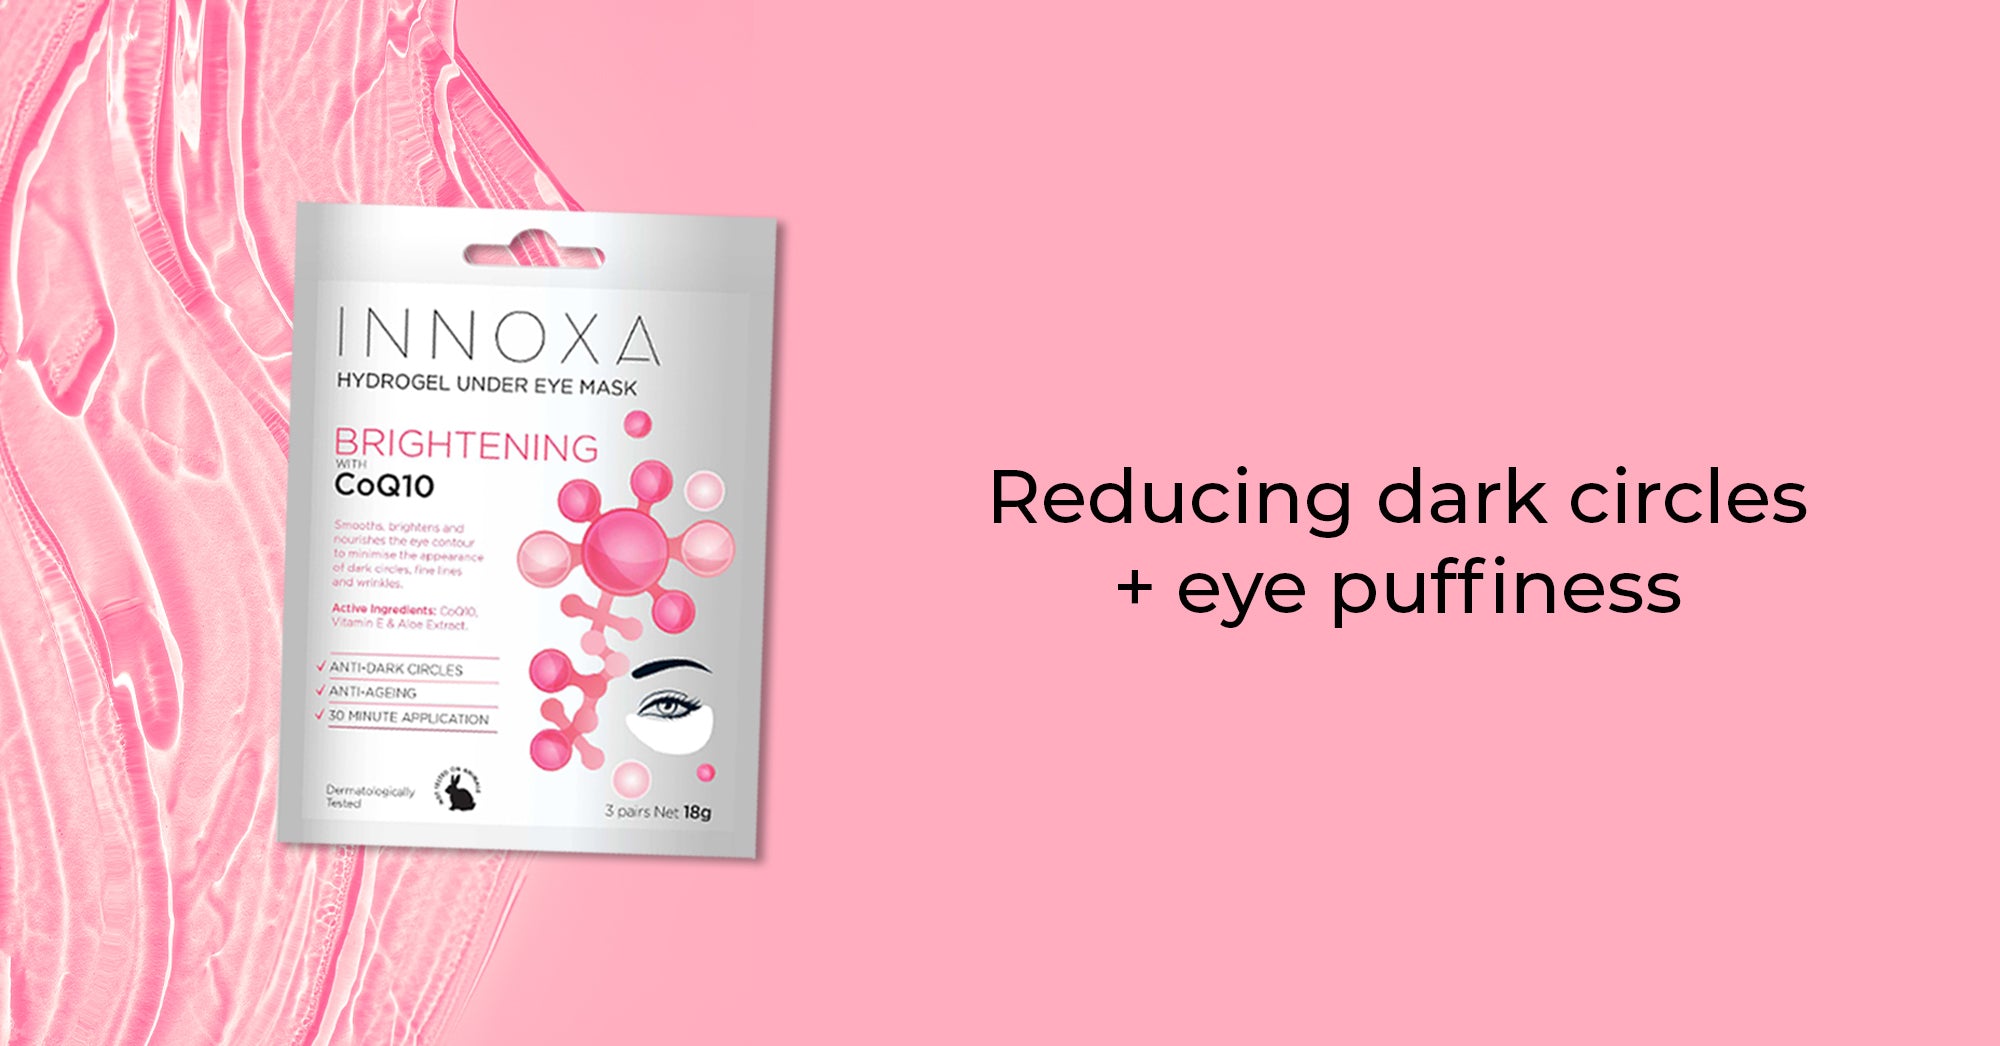 A Step by Step Guide to Reducing Dark Circles & Eye Puffiness